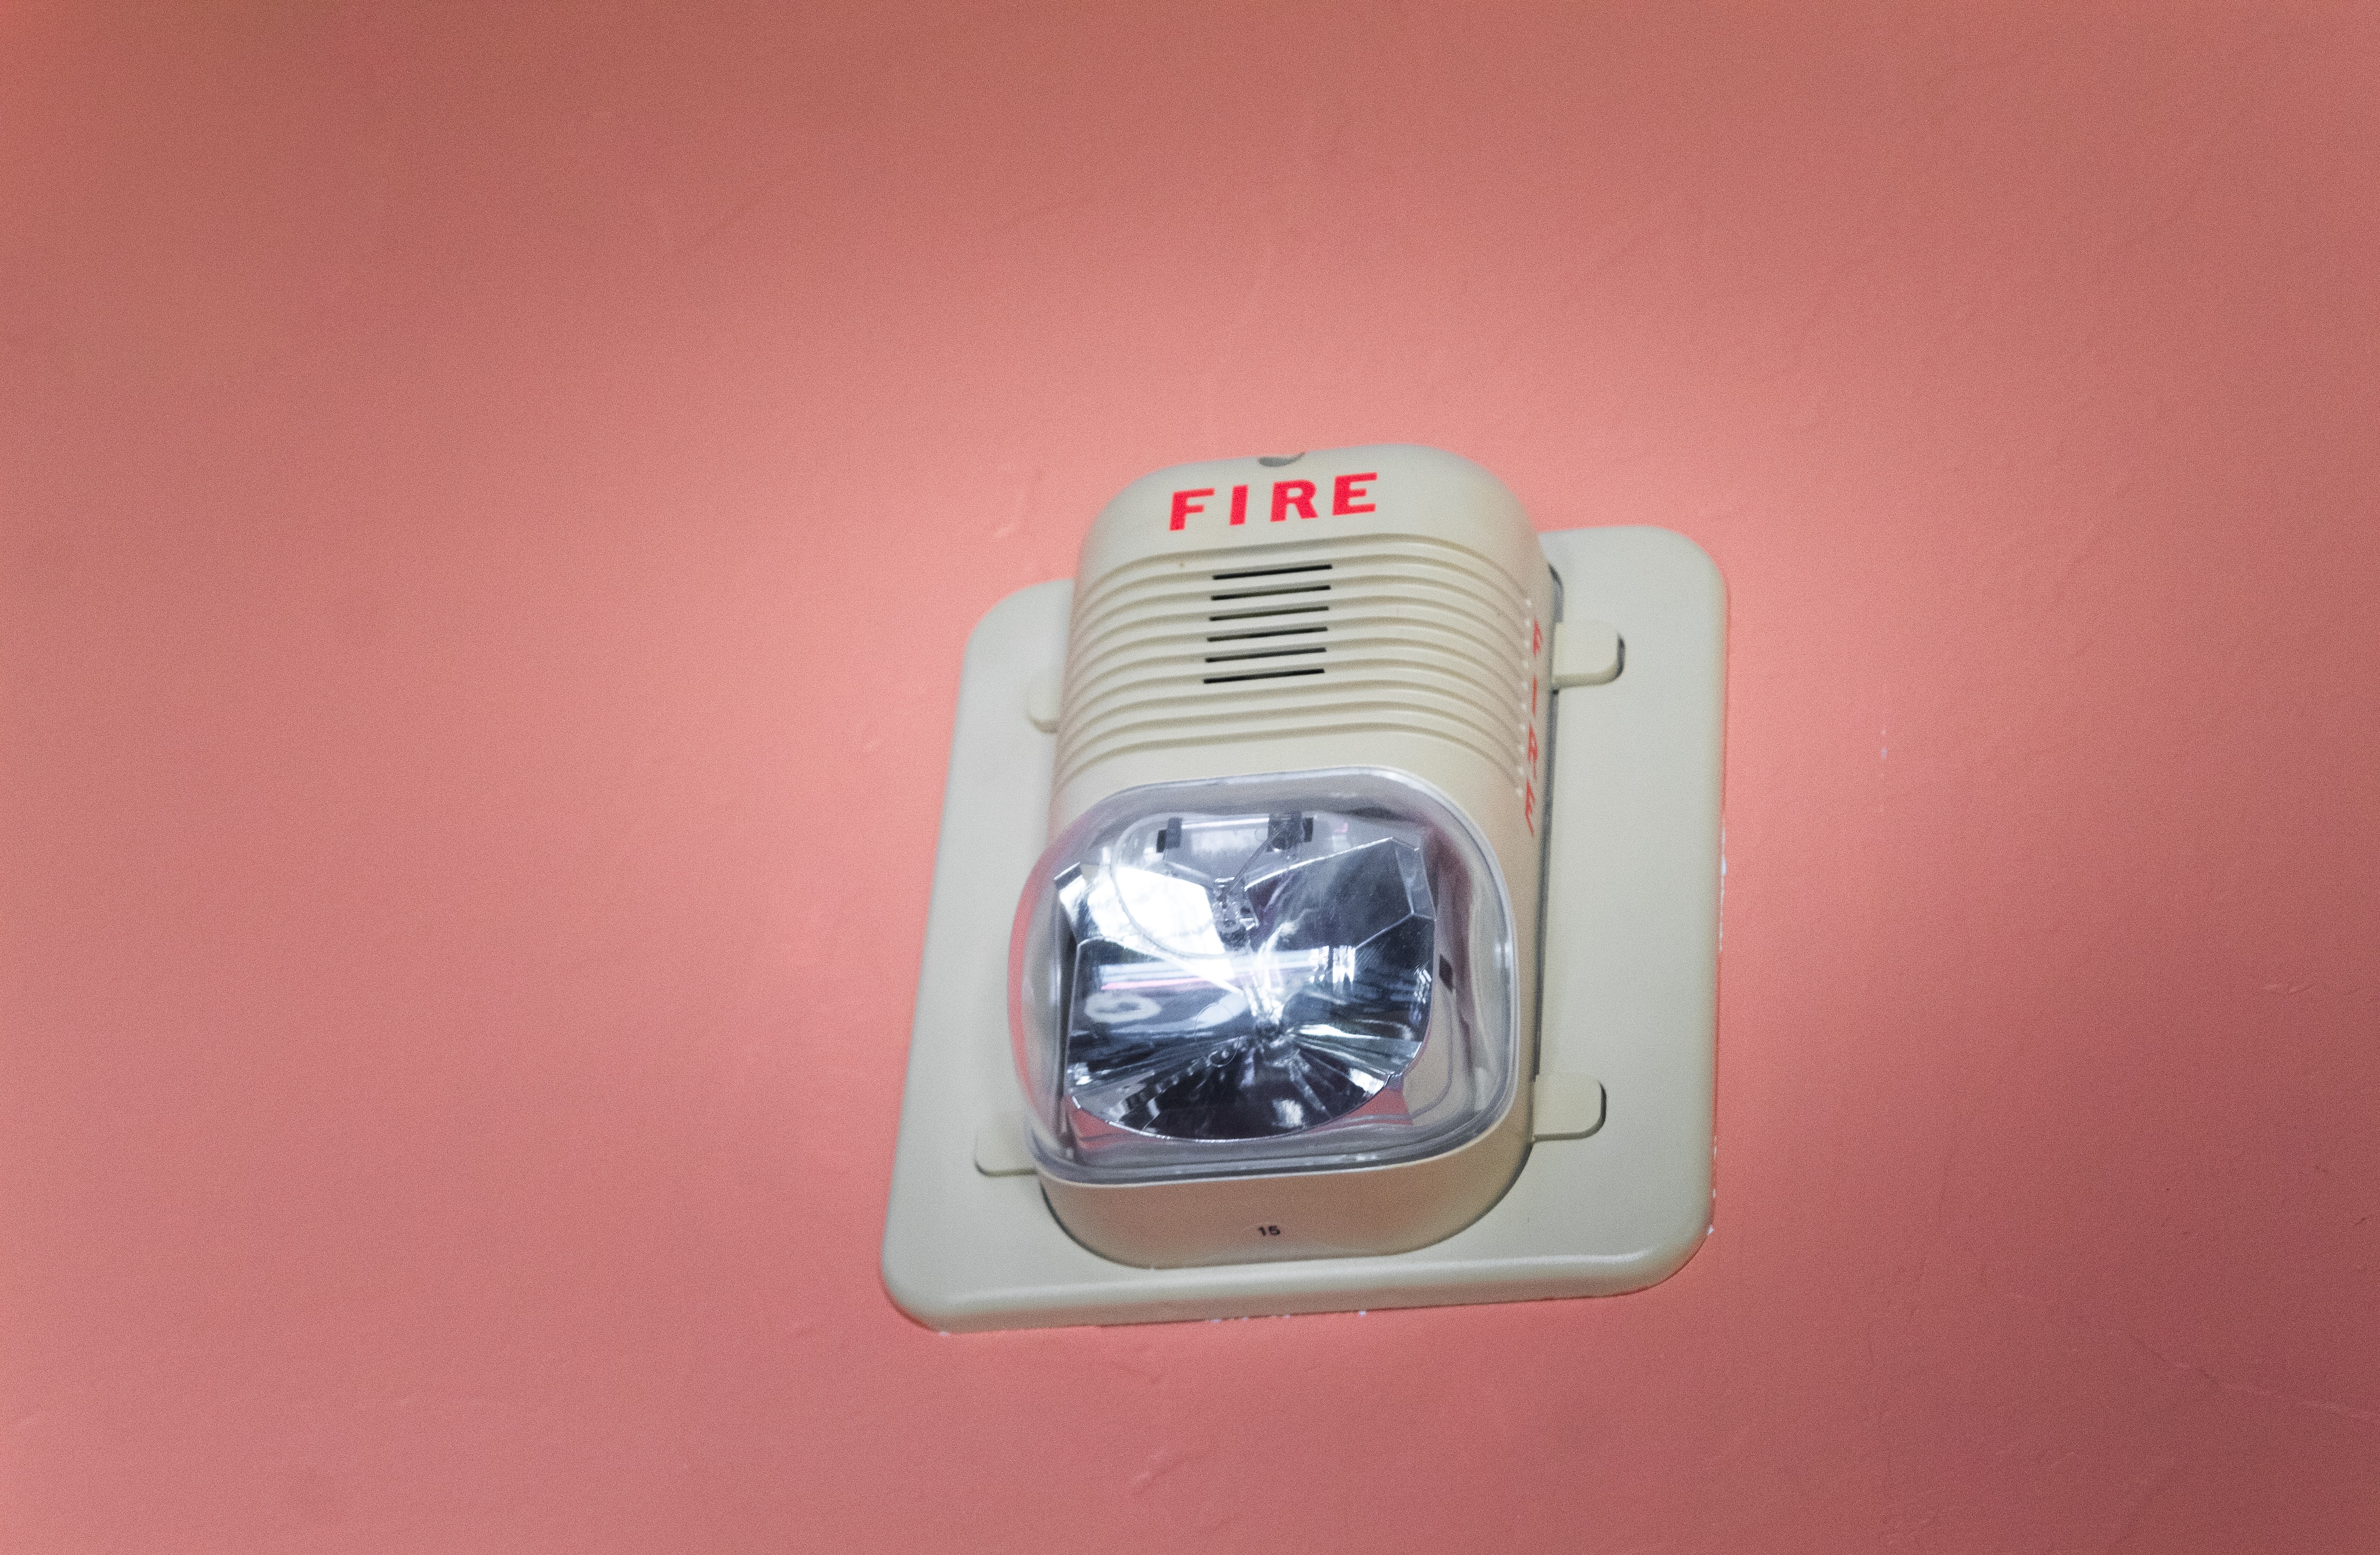 A picture of a fire alarm mounted onto a pink wall